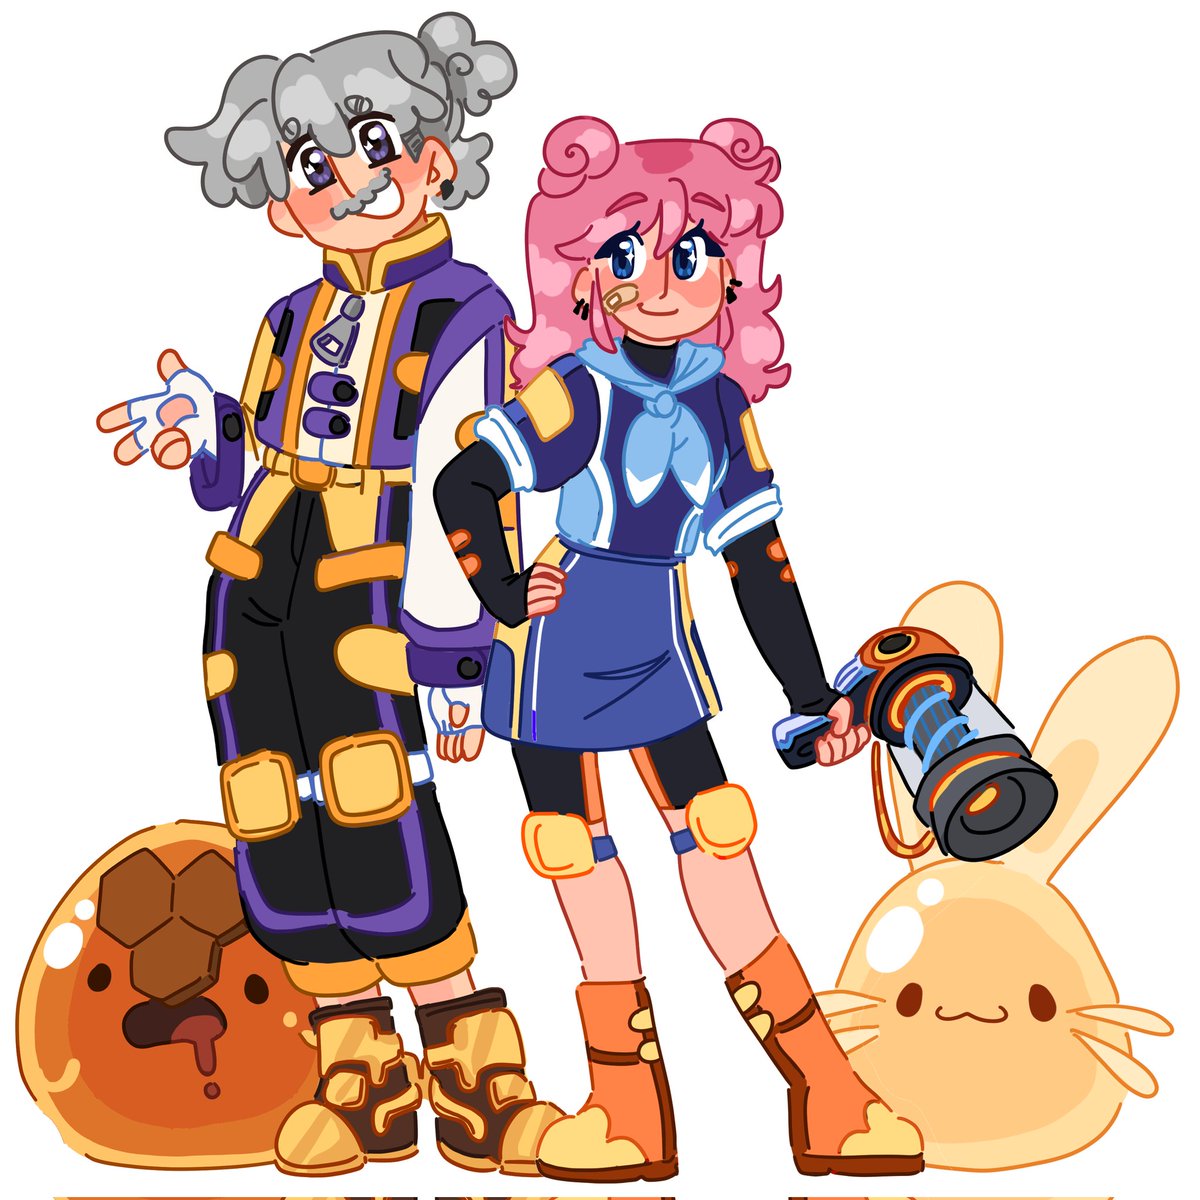 I think their dup has so much potential i really love them so i made them in slime rancher. Might make joel and some others if this gets likes 👀  [#mogswamp #ldshadowlady #minecraftsos #minecraftSOSfanart @LDShadowLady @Mogswamp ]